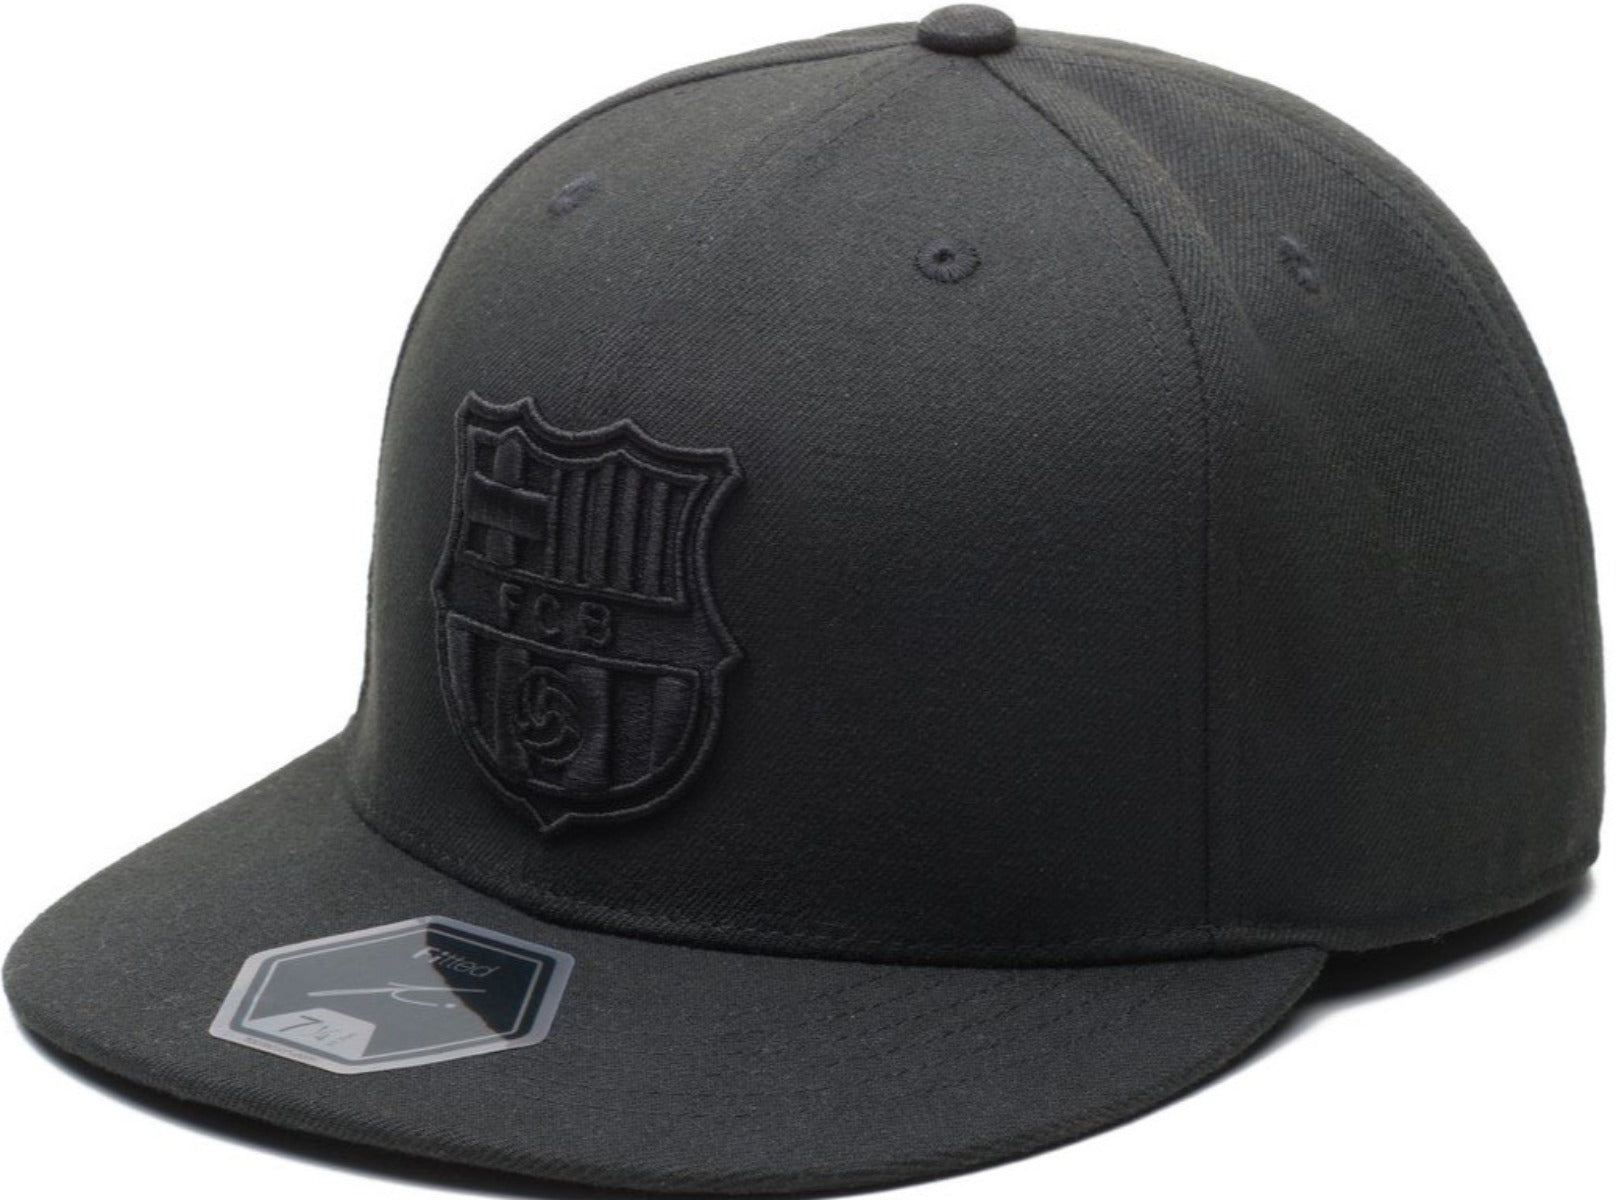 FI COLLECTIONS BARCELONA DUSK FITTED HAT